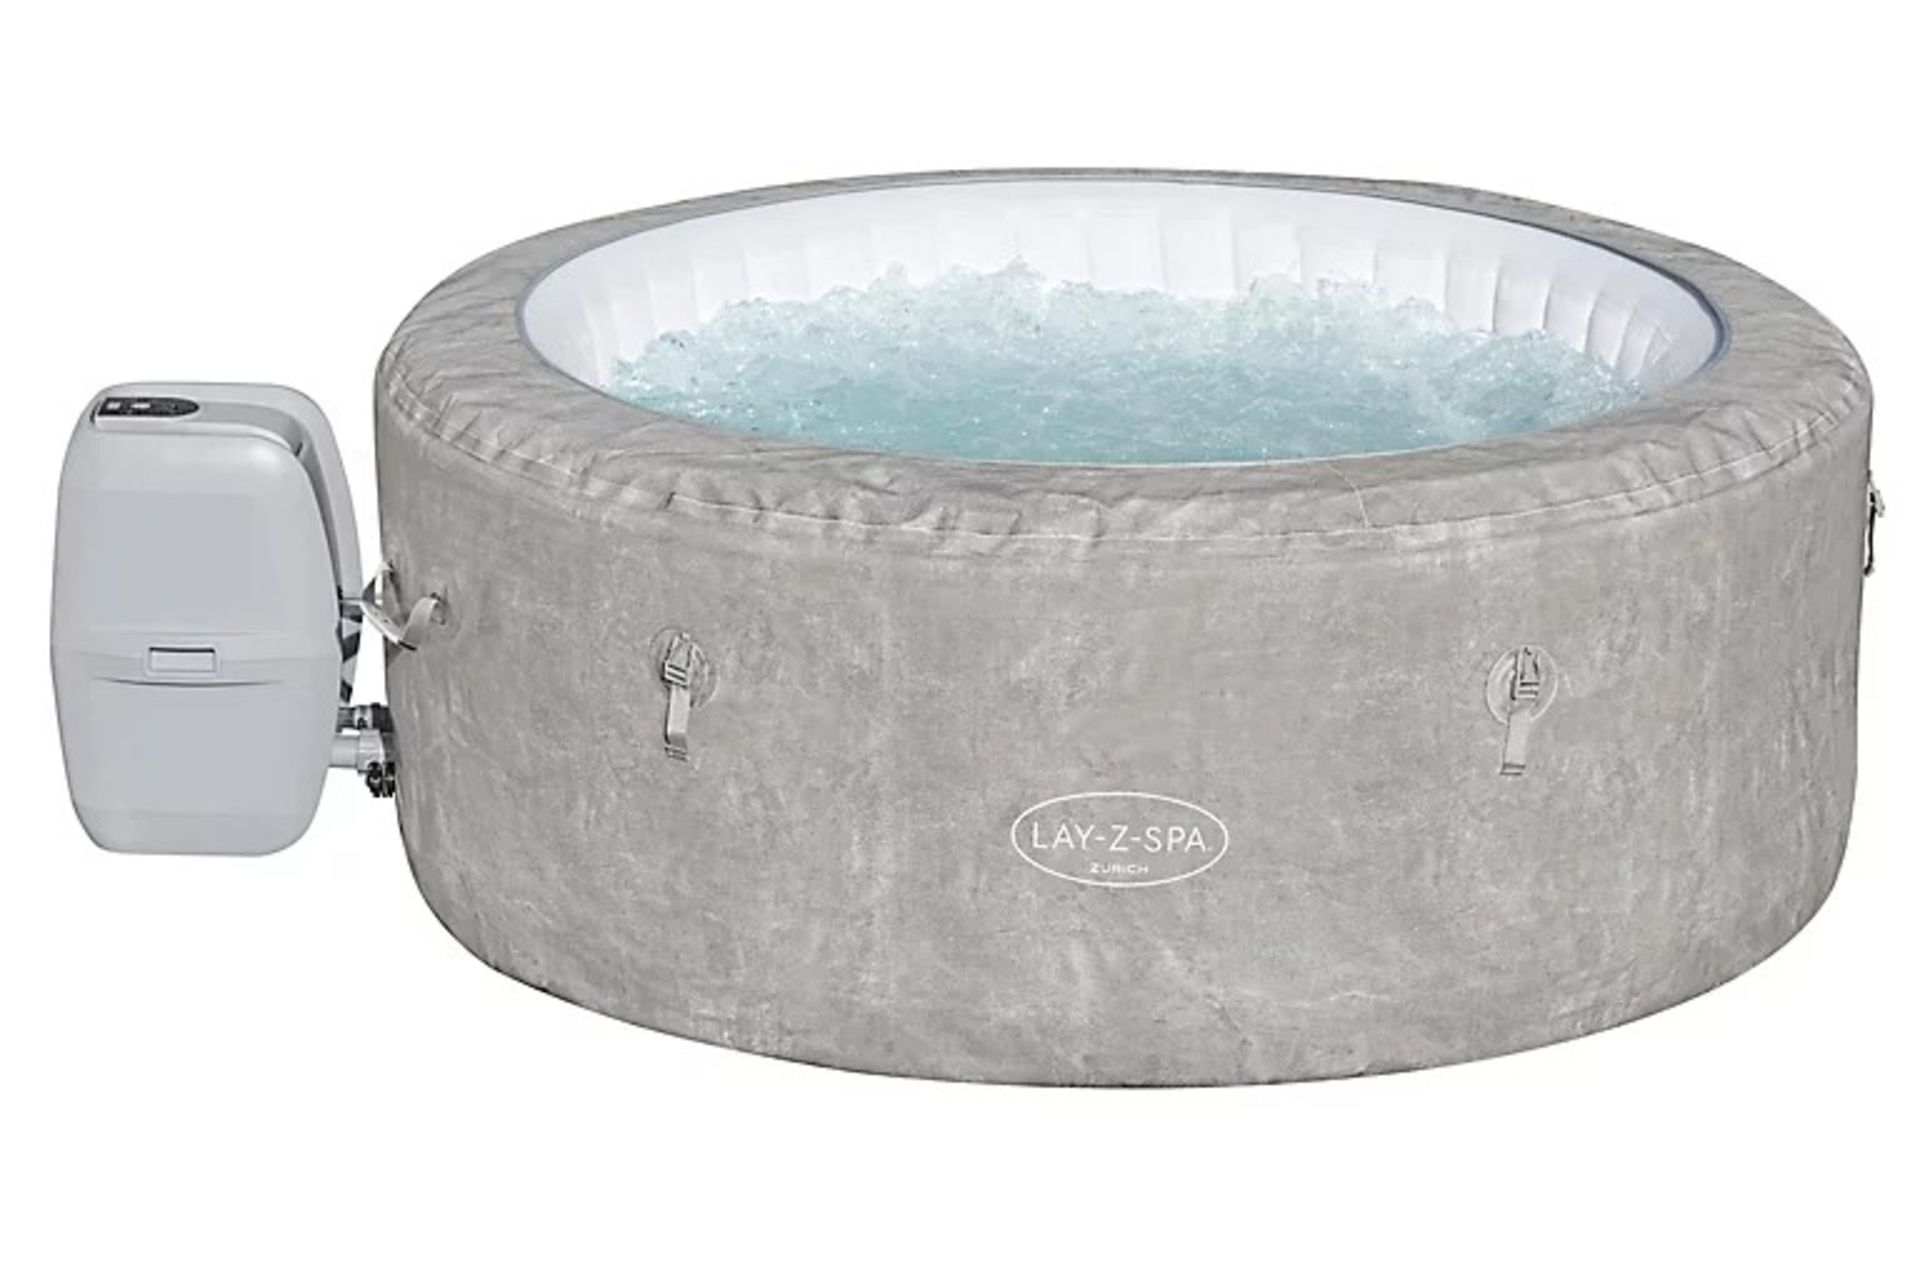 Lay-Z-Spa Zurich 4 person Inflatable hot tub - ER42